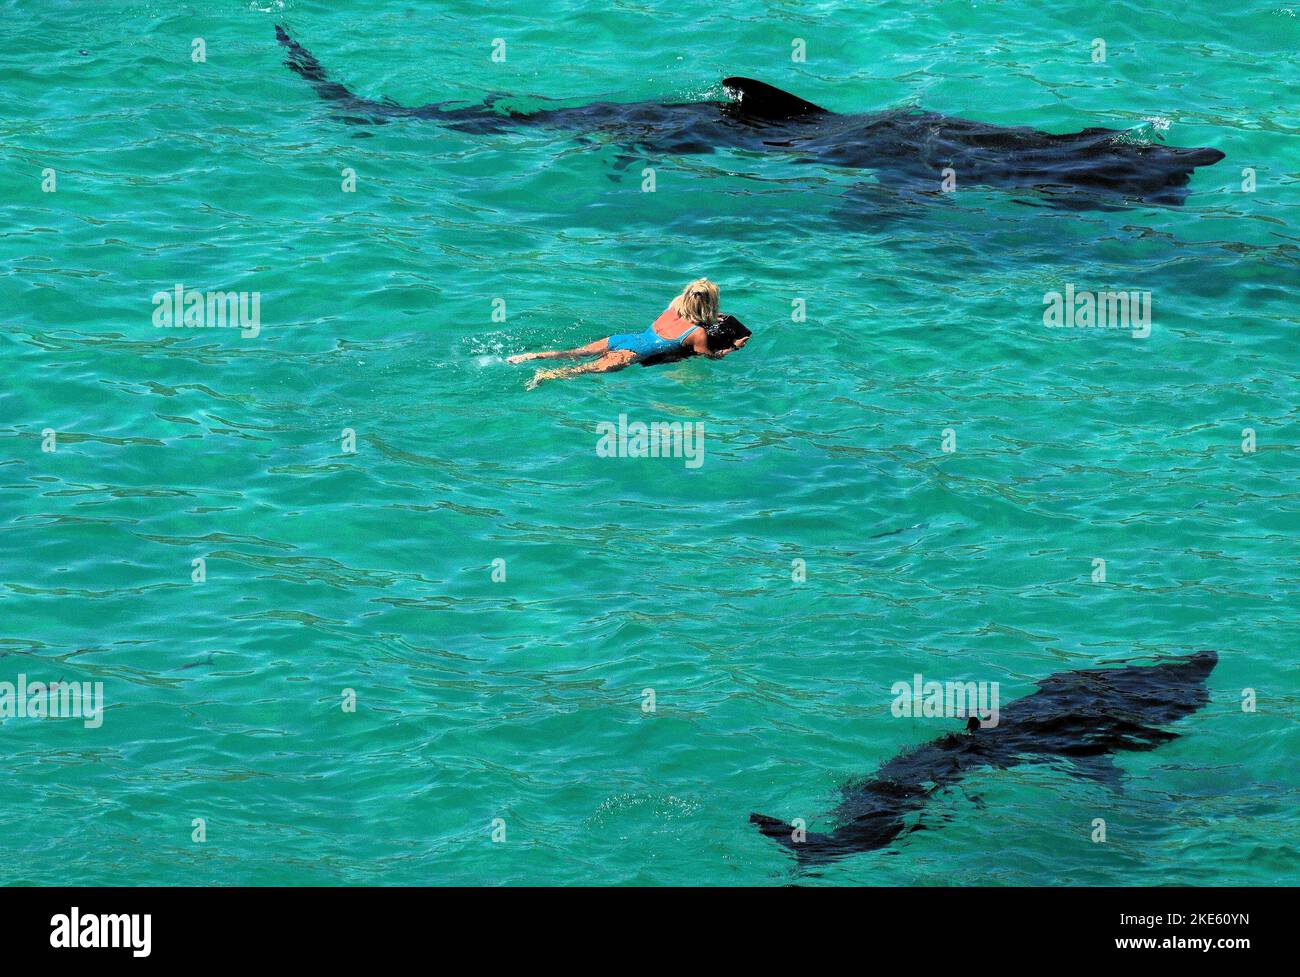 Giant Basking sharks seen in clear blue Cornish seas approaching swimmers. Stock Photo